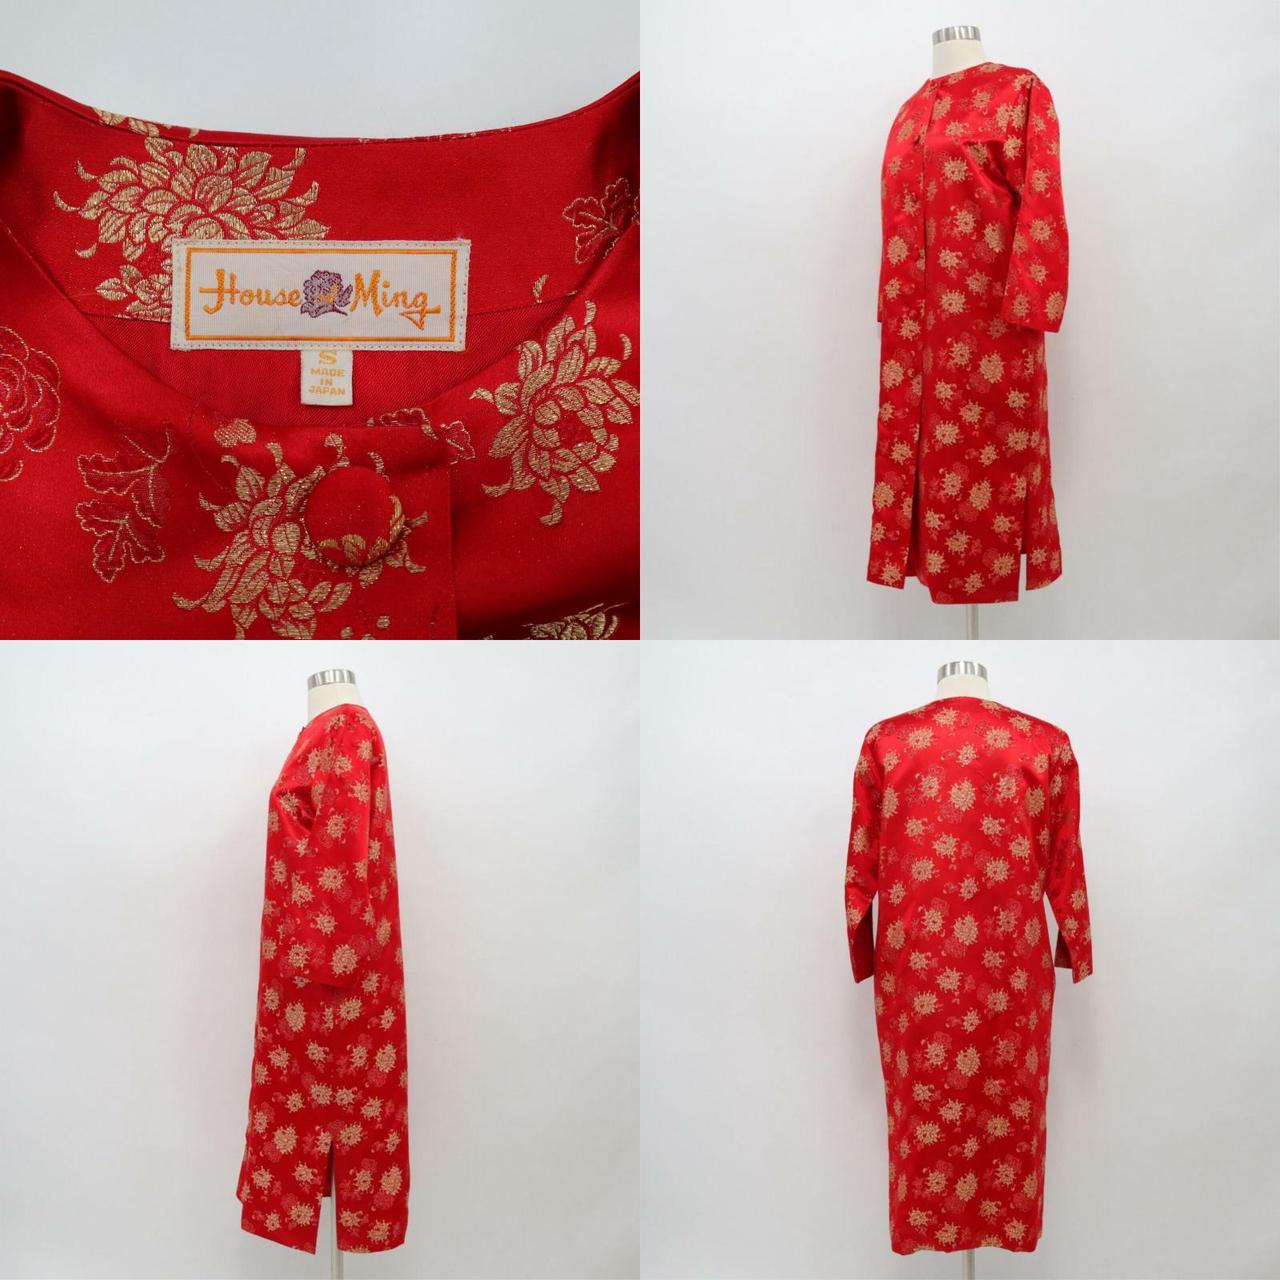 House of CB Women's Red and Gold Cover-ups (4)